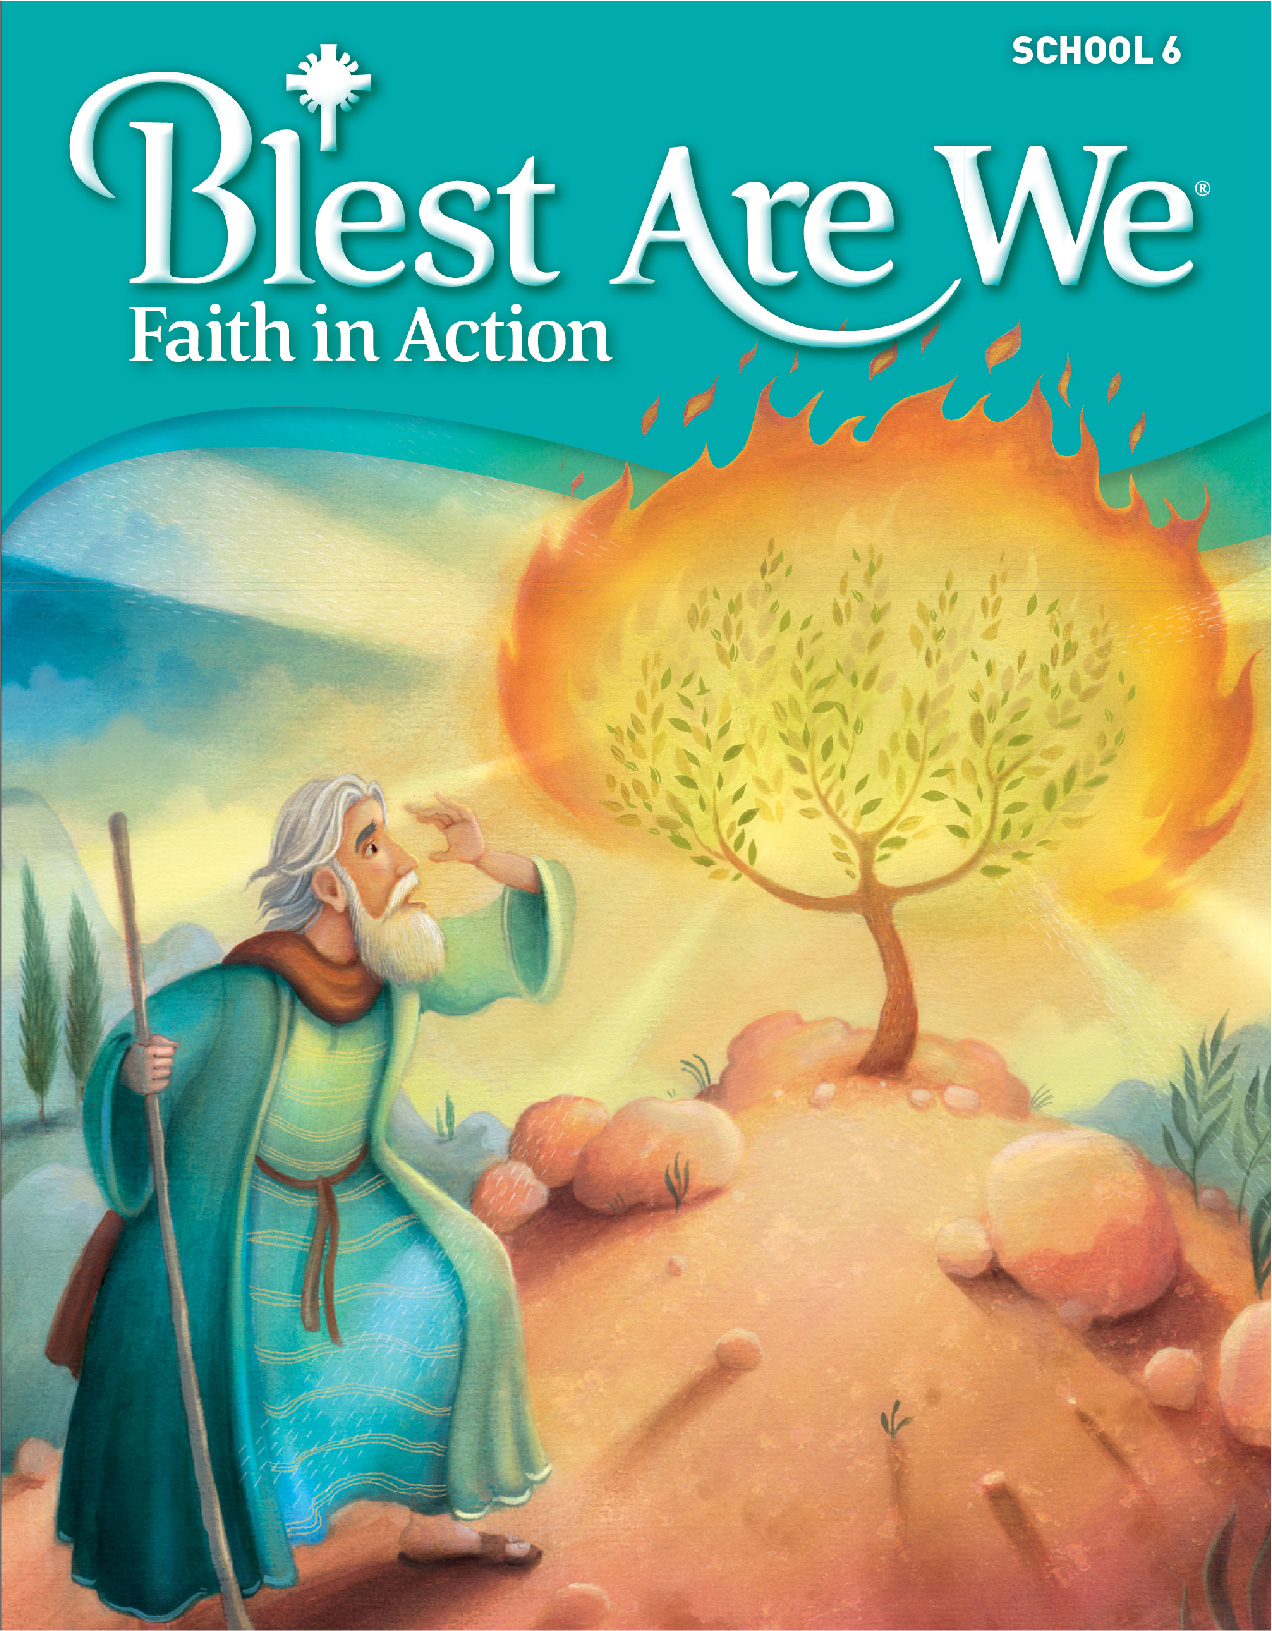 Book cover of Blest Are We, Faith in Action, School 6, with a man walking up a mountain